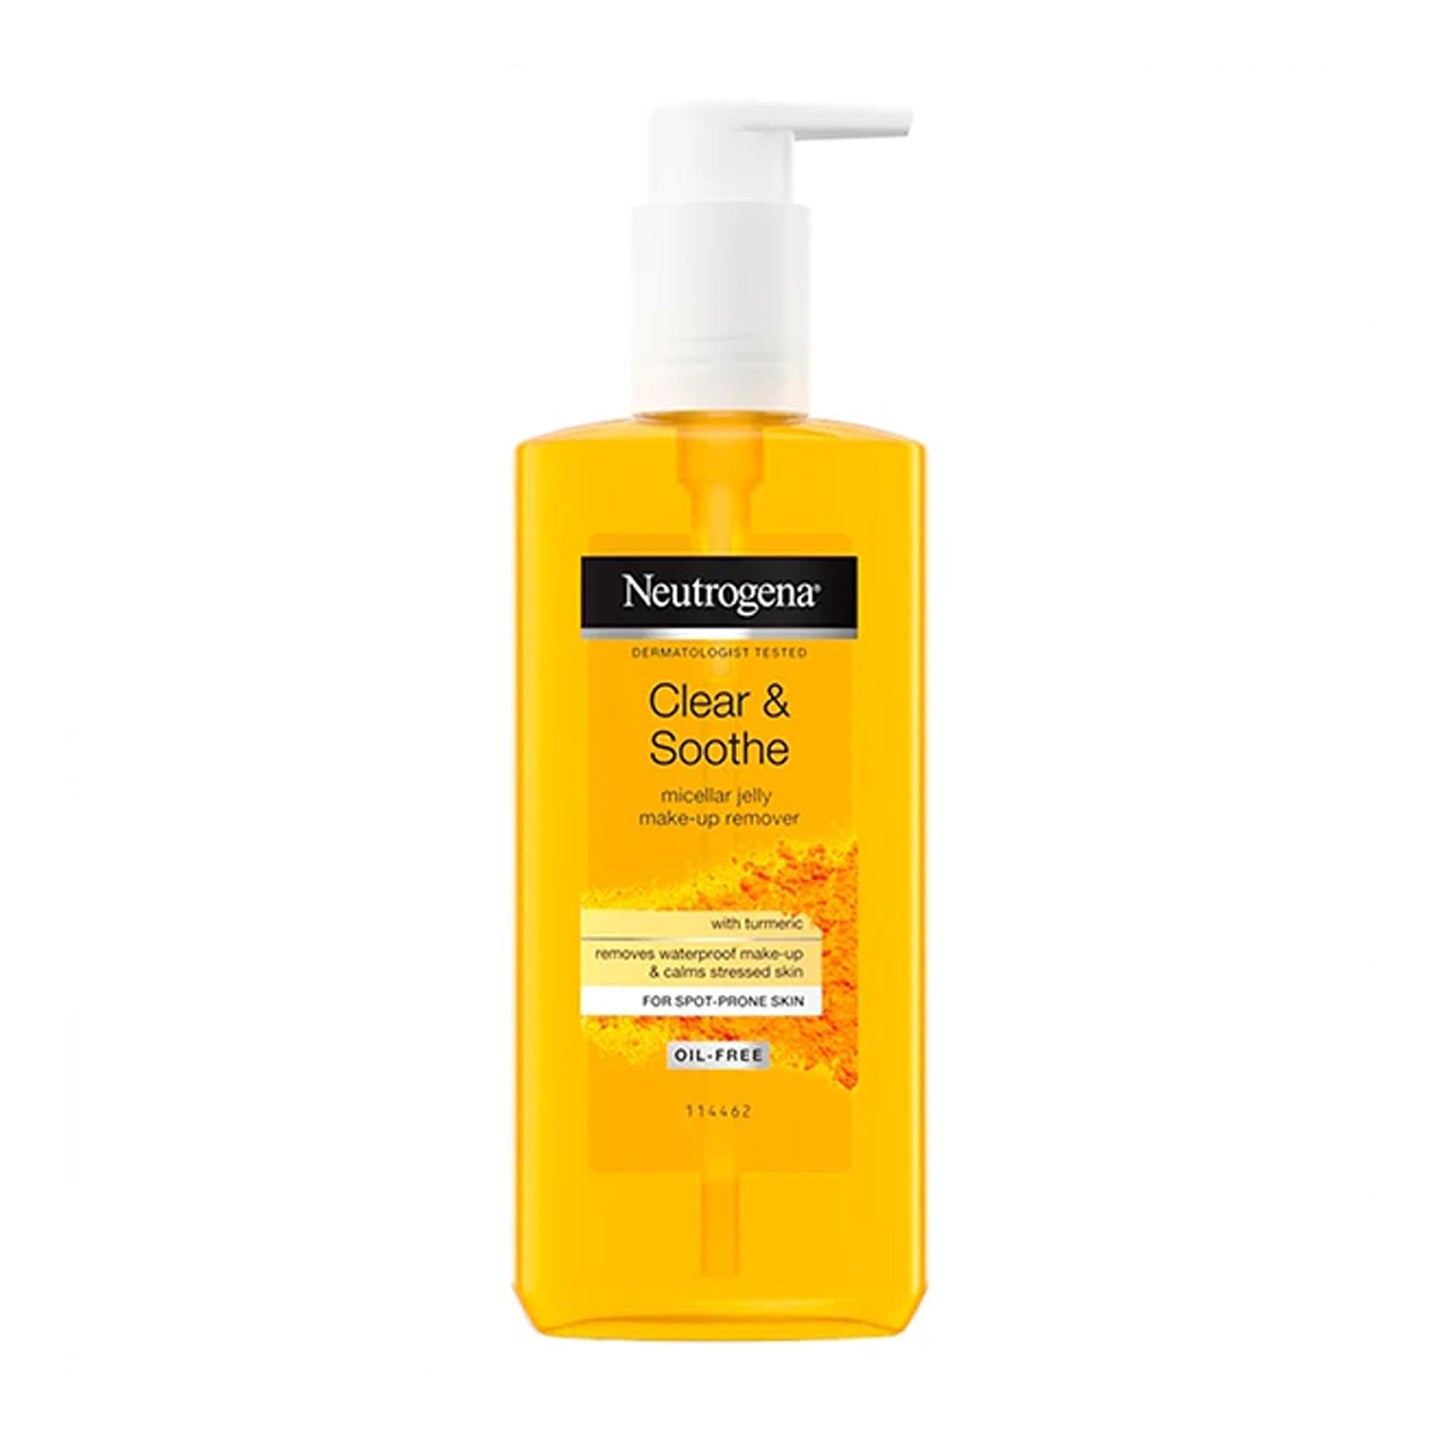 NEUTROGENA - CLEAR & SOOTHE MICELLAR JELLY MAKEUP REMOVER - 200ML